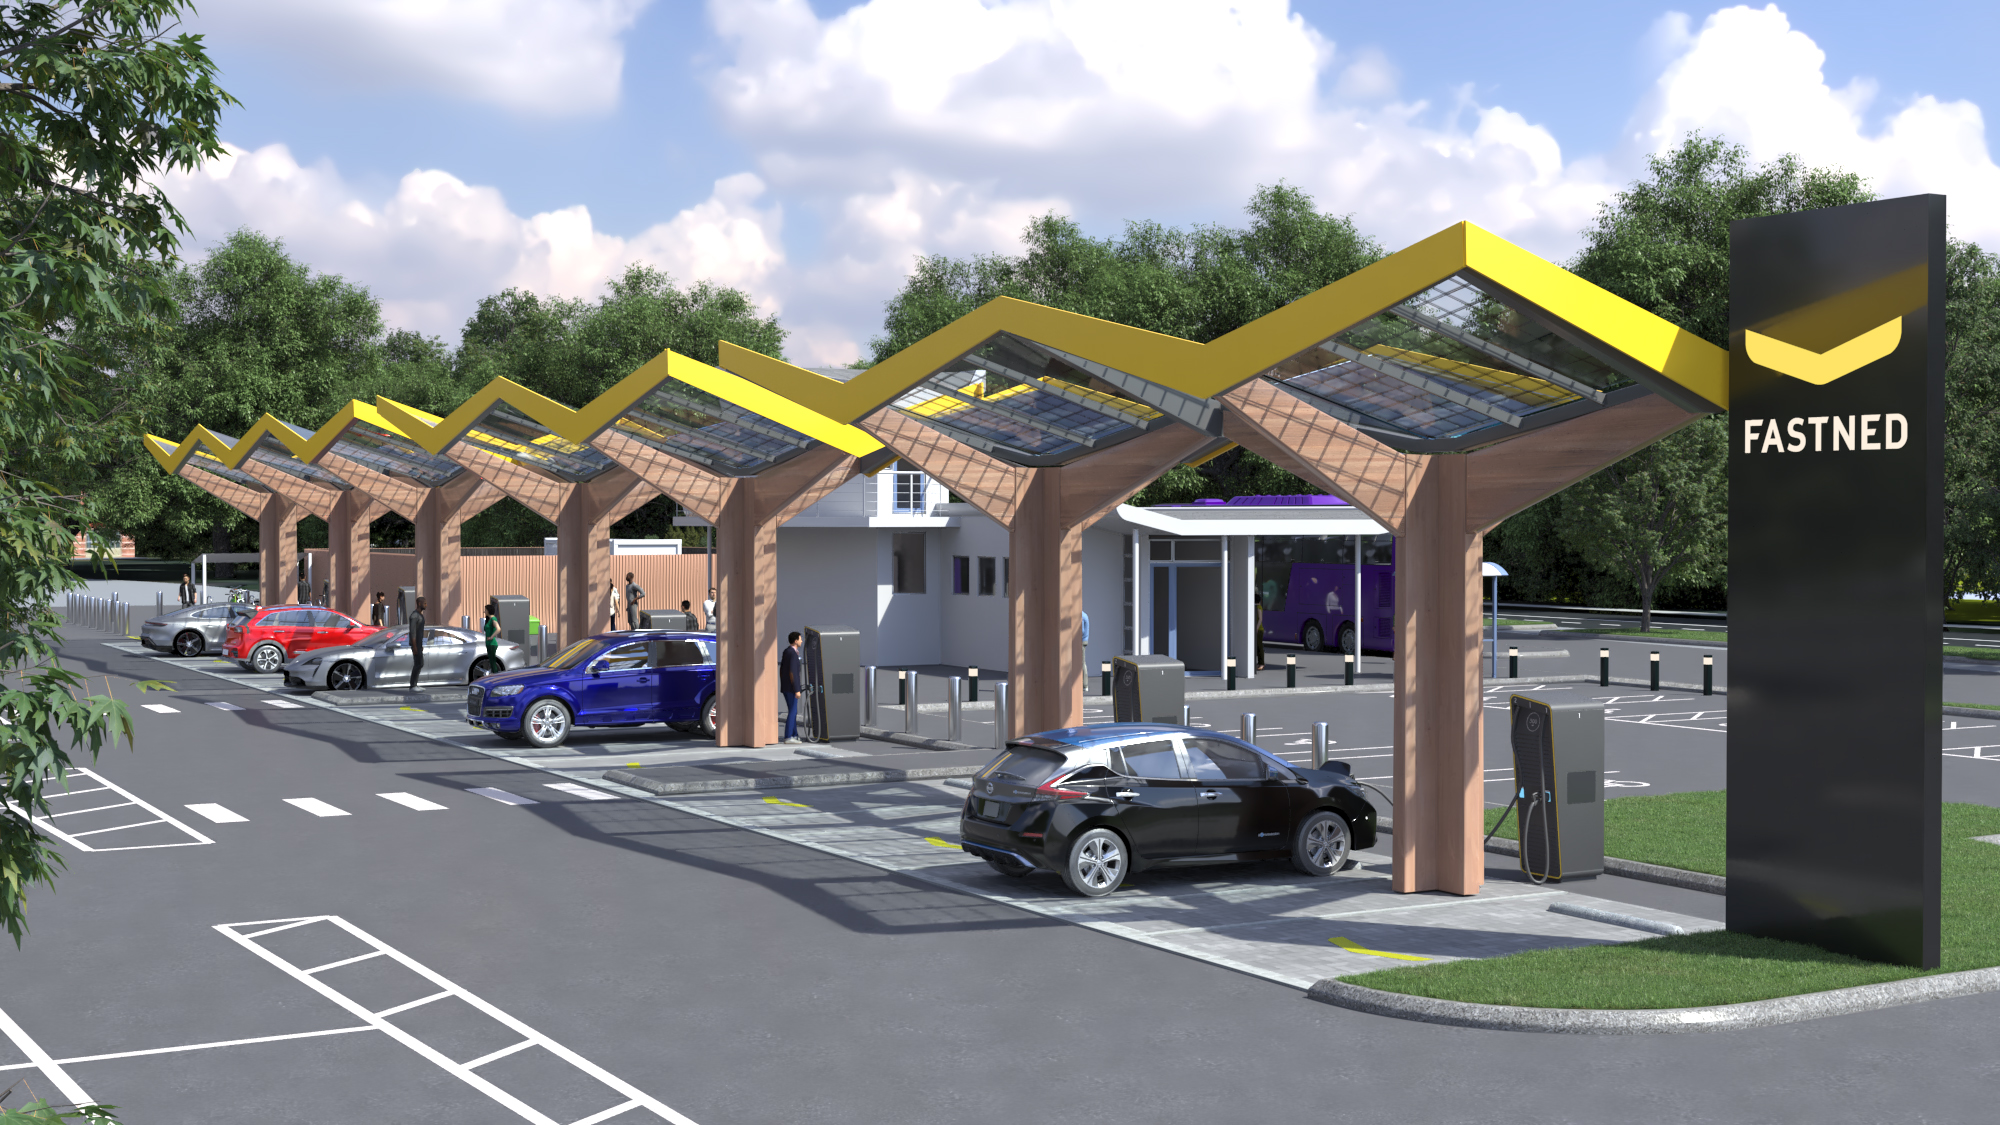 UK's largest and most powerful electric vehicle charging hub set for